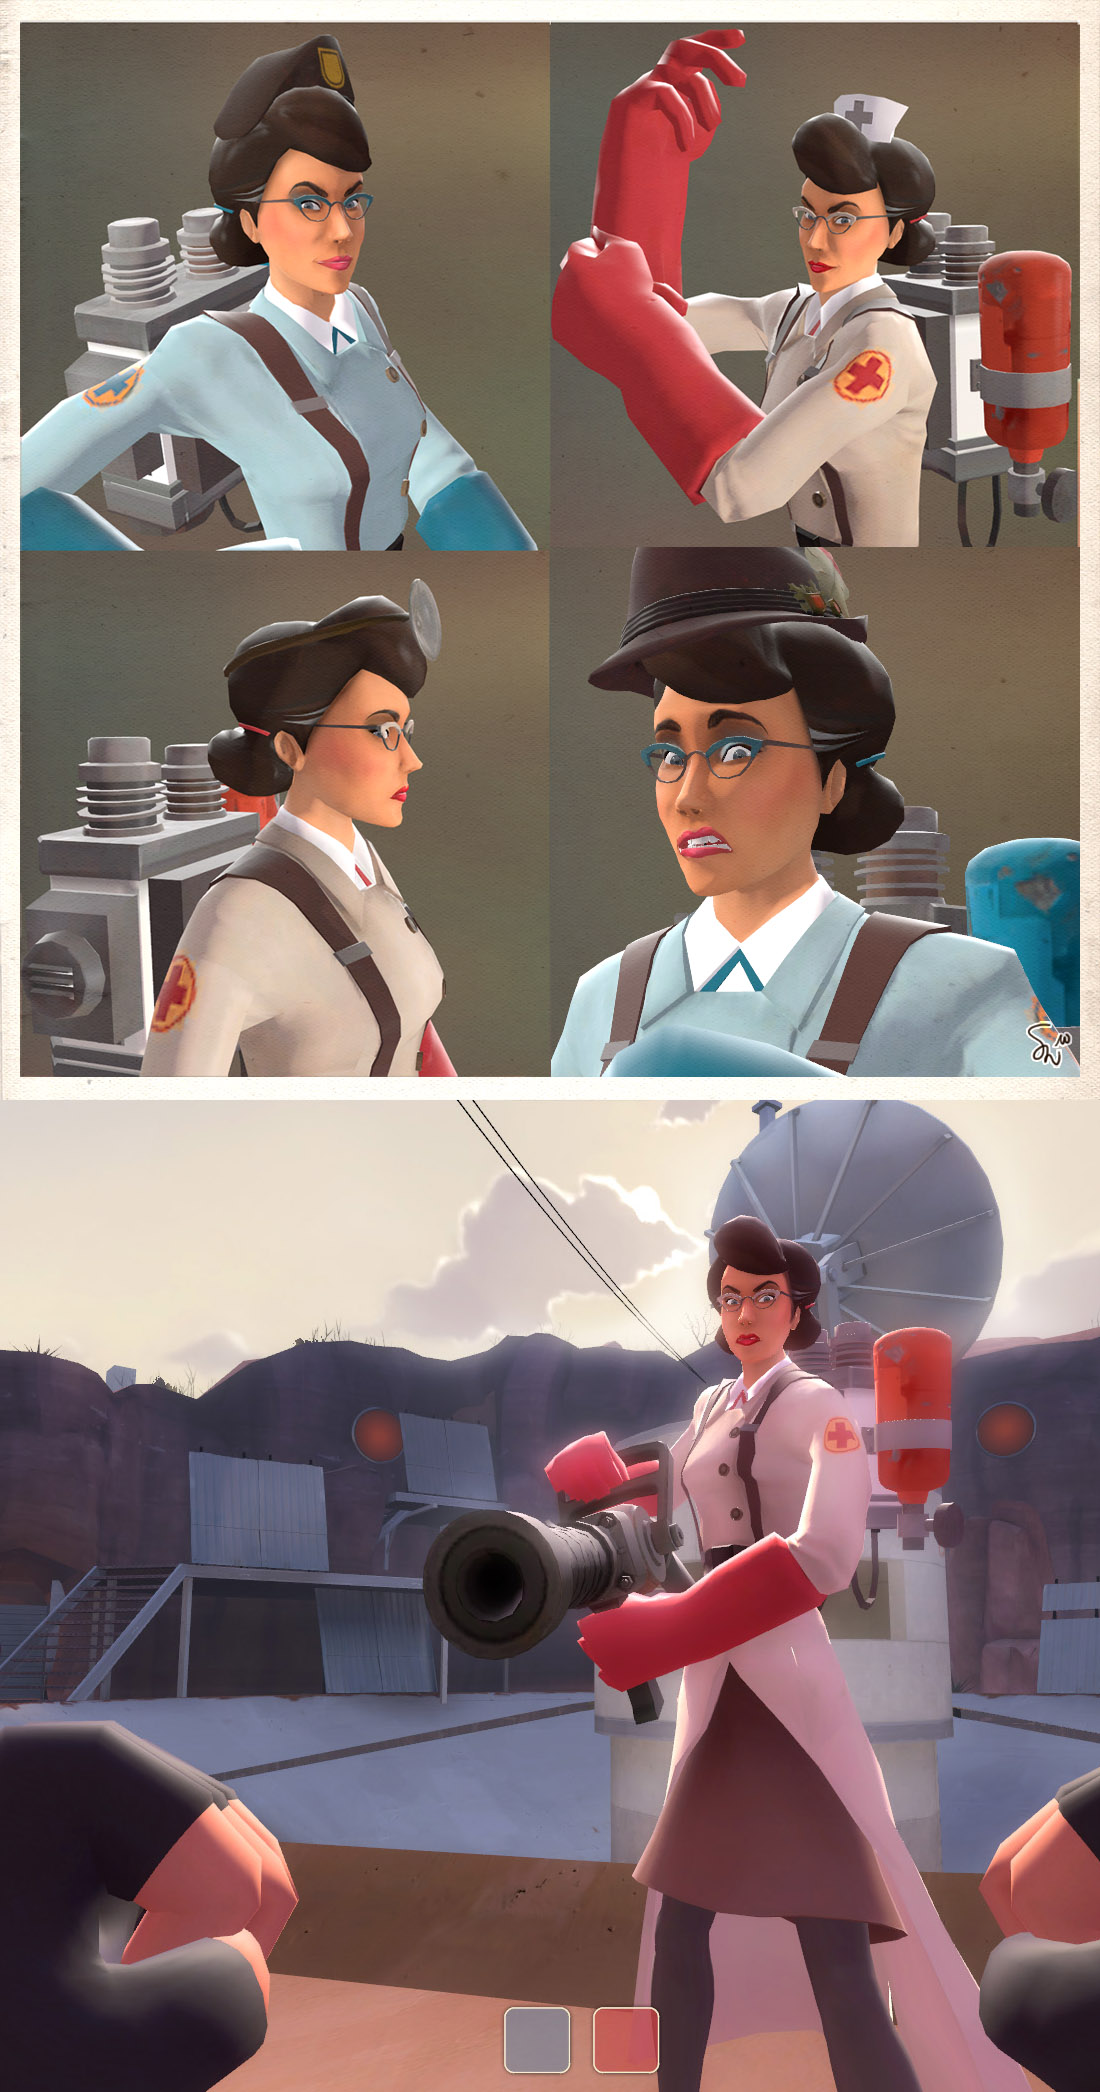 Female_Medic_and_Hats_by_ChemicalAlia.jpg